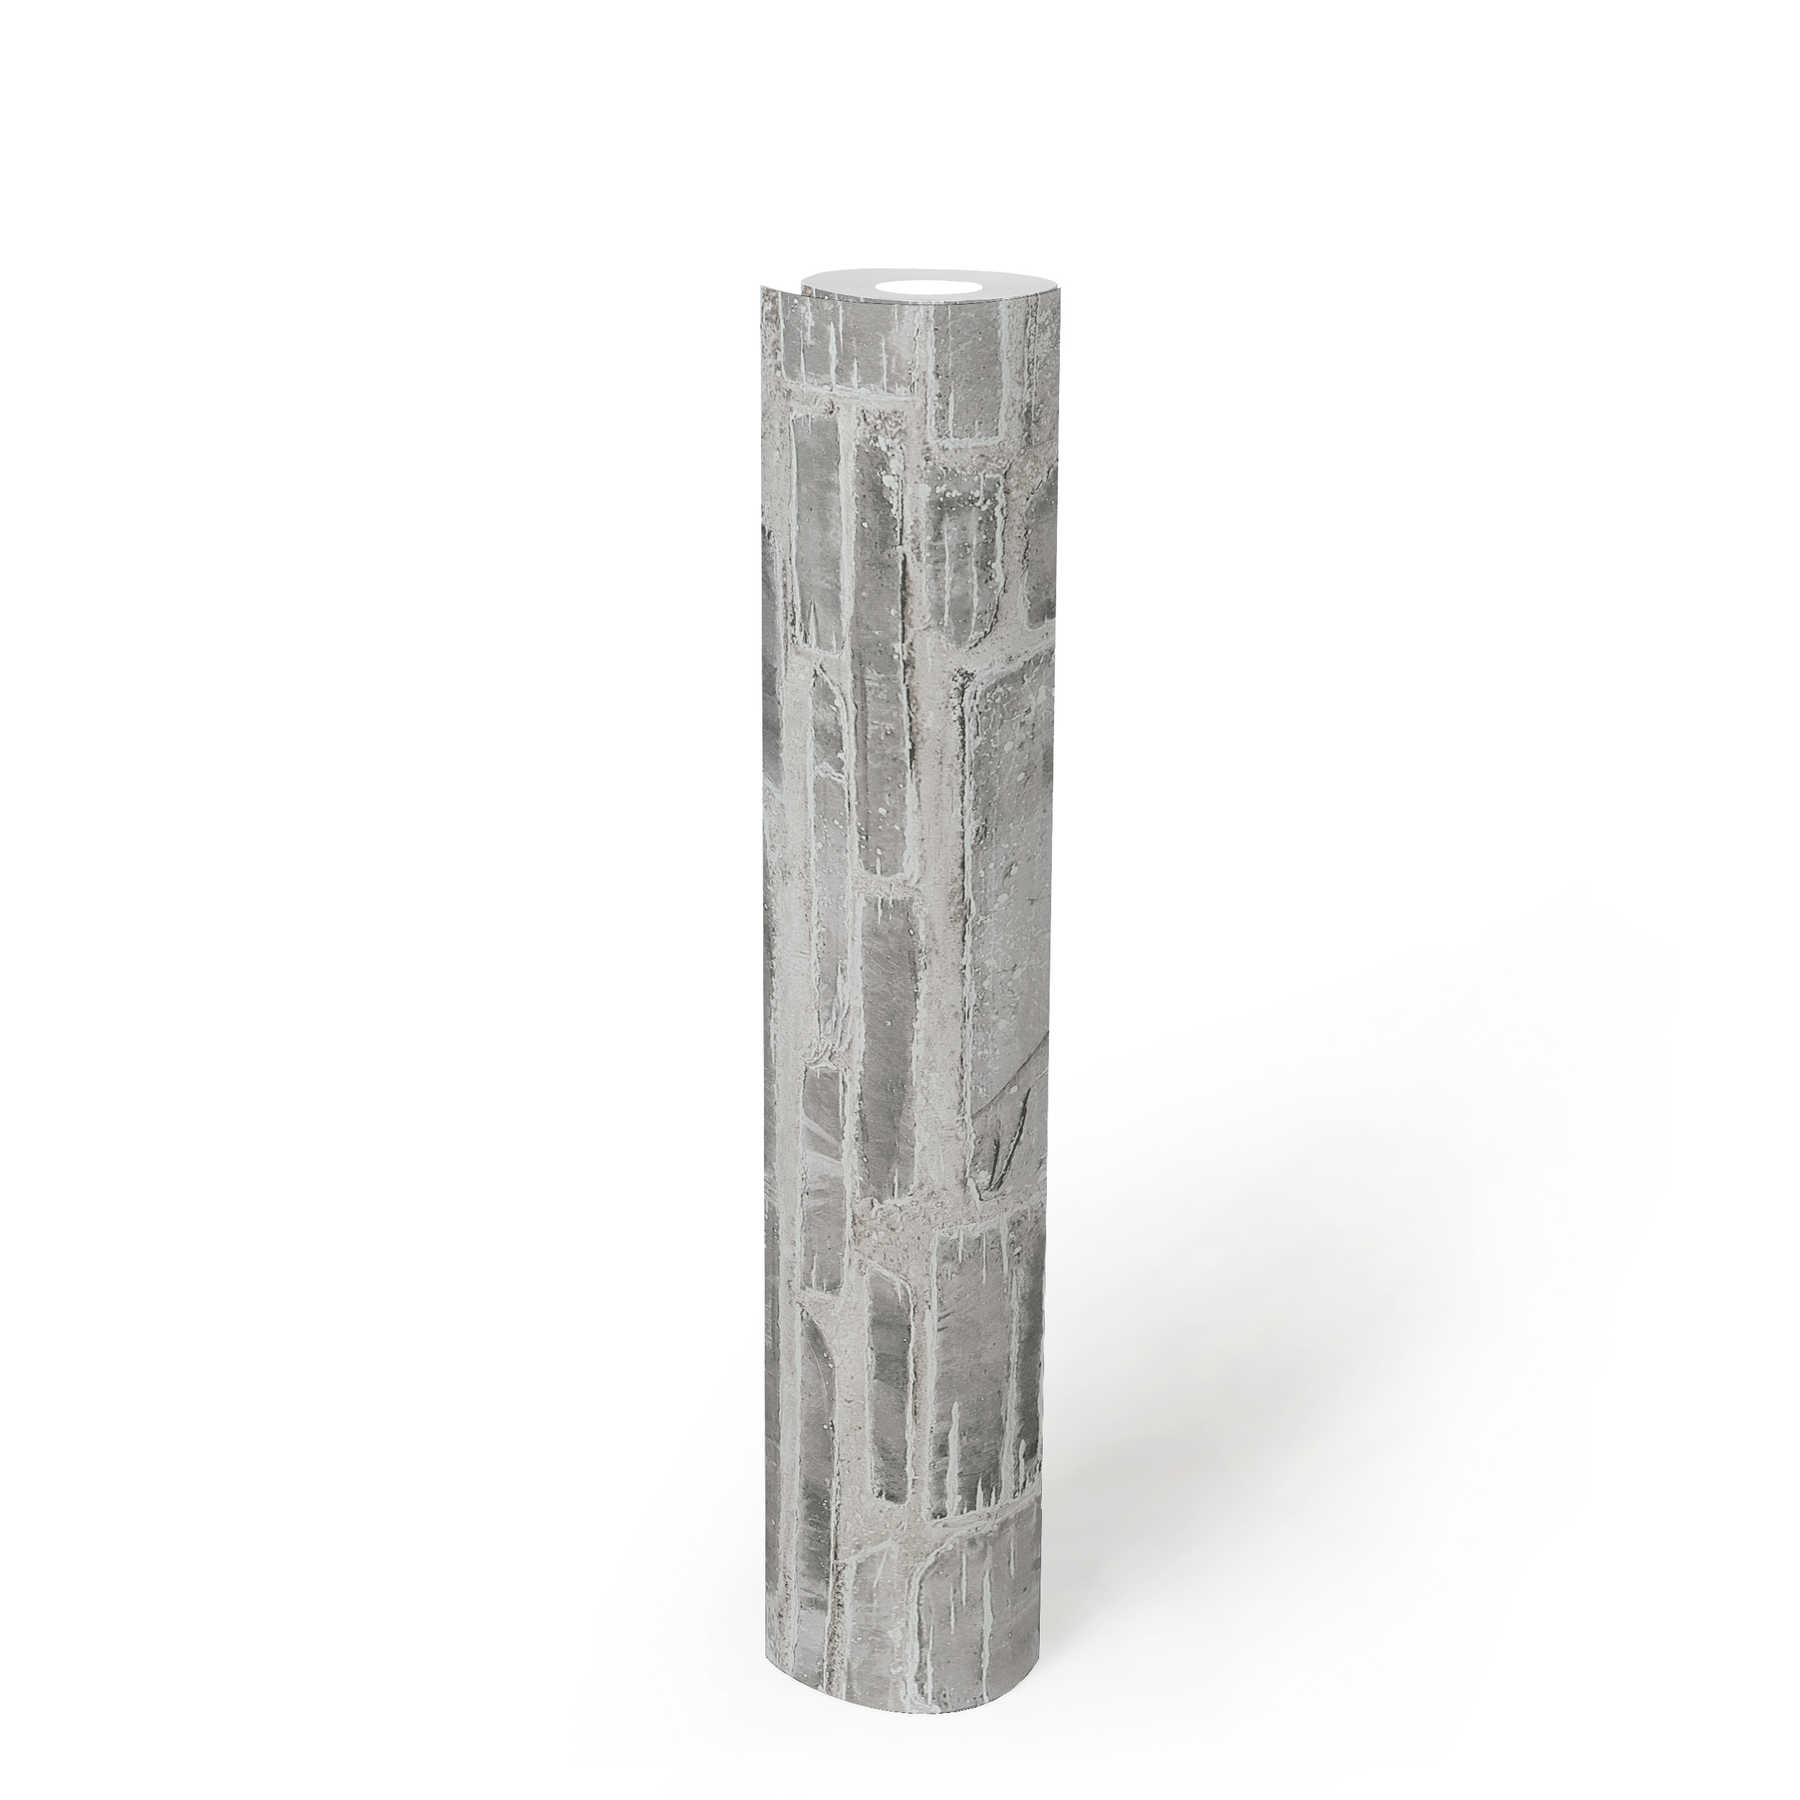             Wallpaper stone wall rustic with 3D effect - grey, beige
        